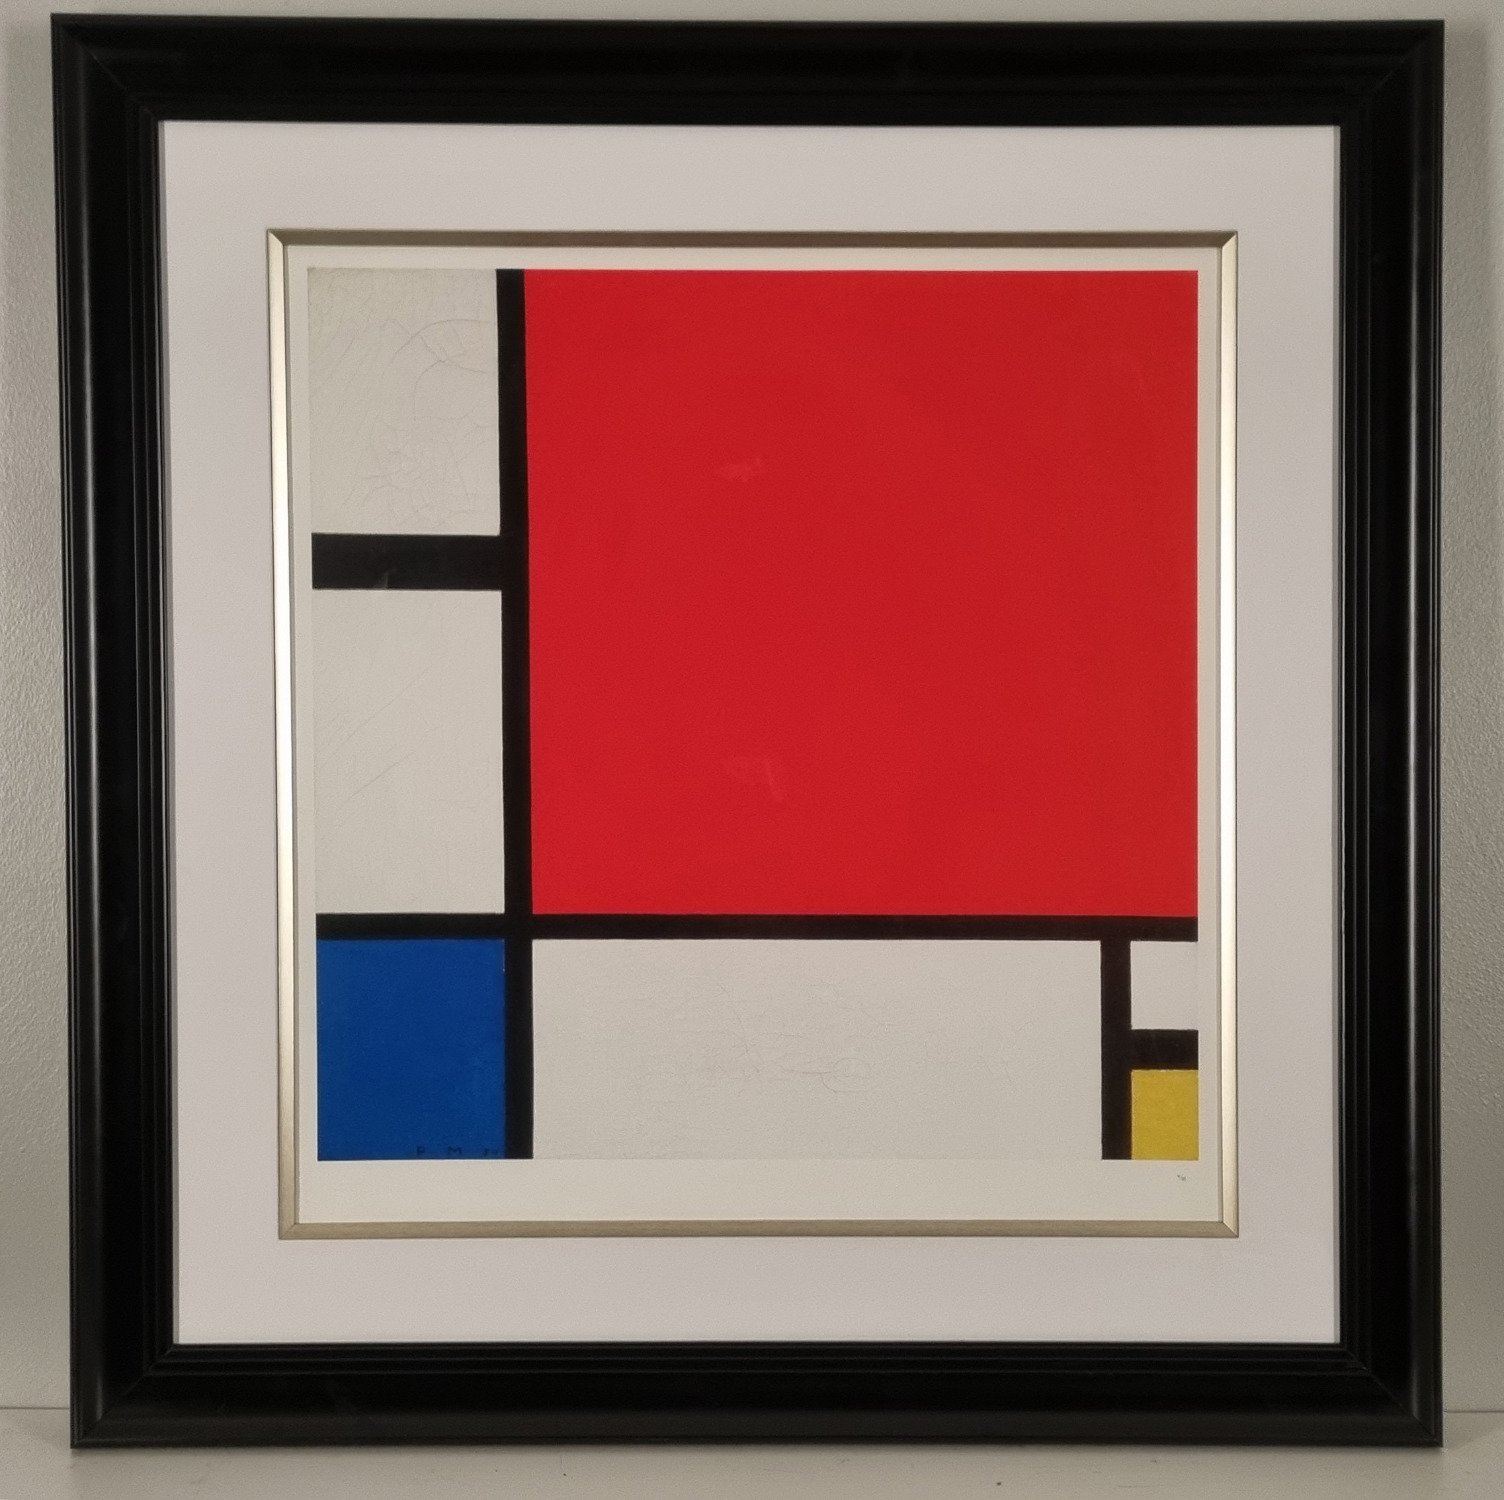 A limited edition print by PIET MONDRIAN (1872-1944) titled "Composition II in red, blue and